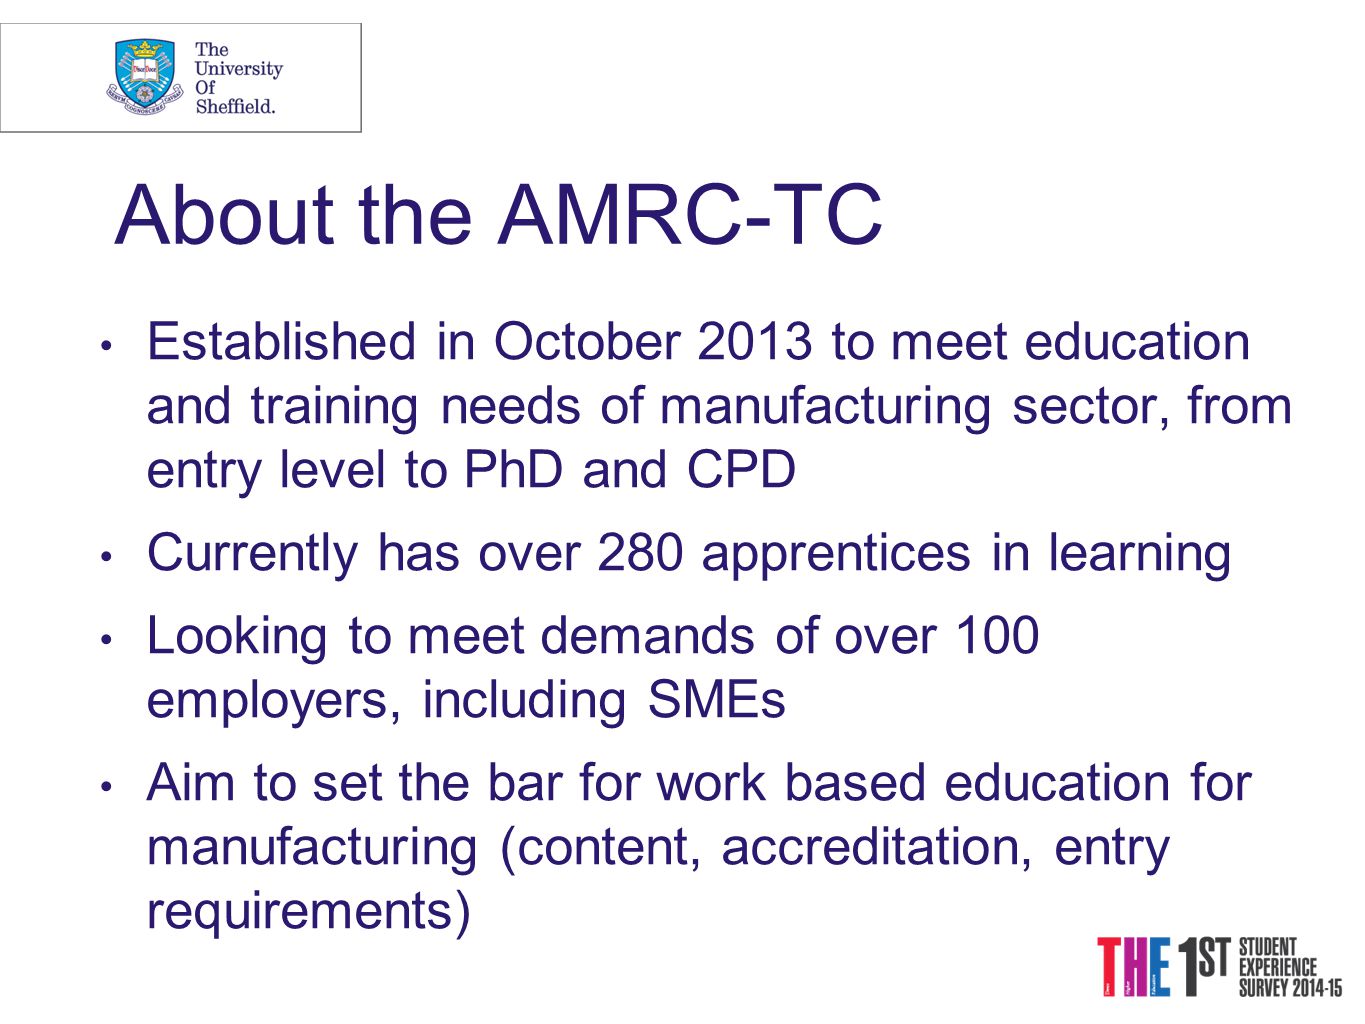 About the AMRC-TC Established in October 2013 to meet education and training needs of manufacturing sector, from entry level to PhD and CPD Currently has over 280 apprentices in learning Looking to meet demands of over 100 employers, including SMEs Aim to set the bar for work based education for manufacturing (content, accreditation, entry requirements)